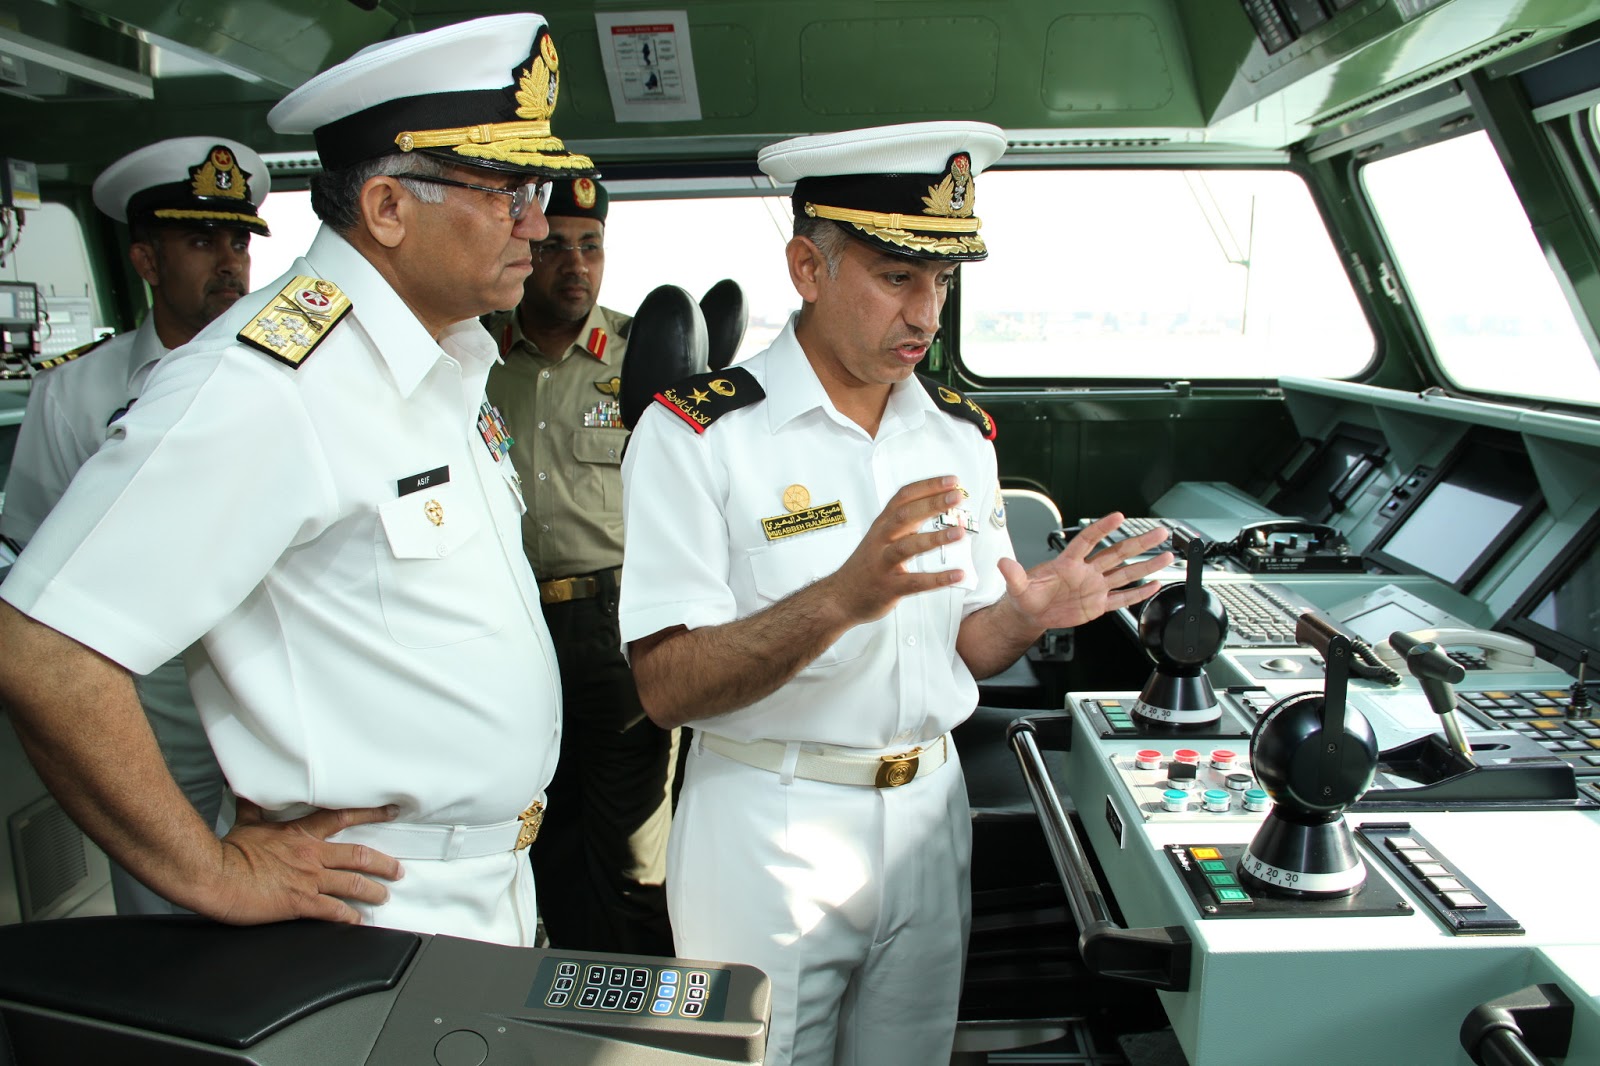 The+commanding+officer+of+a+ship+of+UAE+briefing+Admiral+Asif+Sandila+about+the+systems+installed.JPG